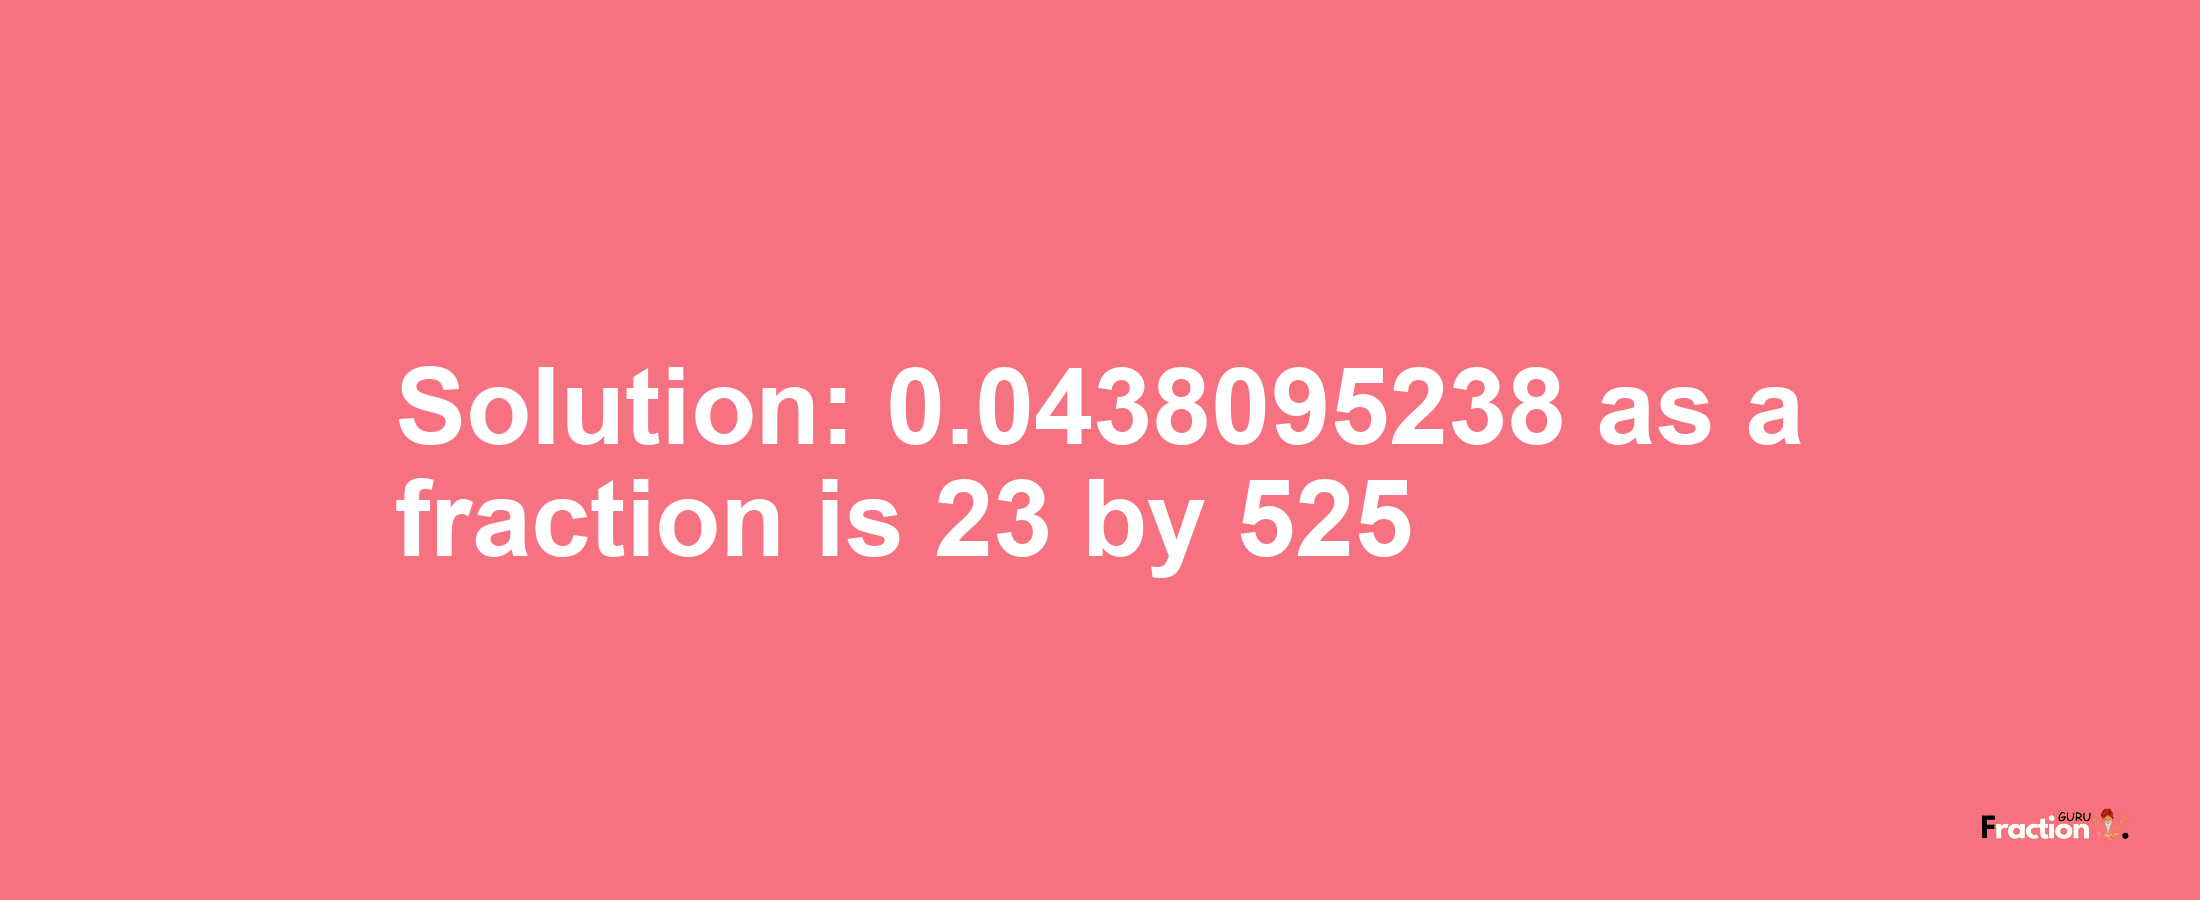 Solution:0.0438095238 as a fraction is 23/525